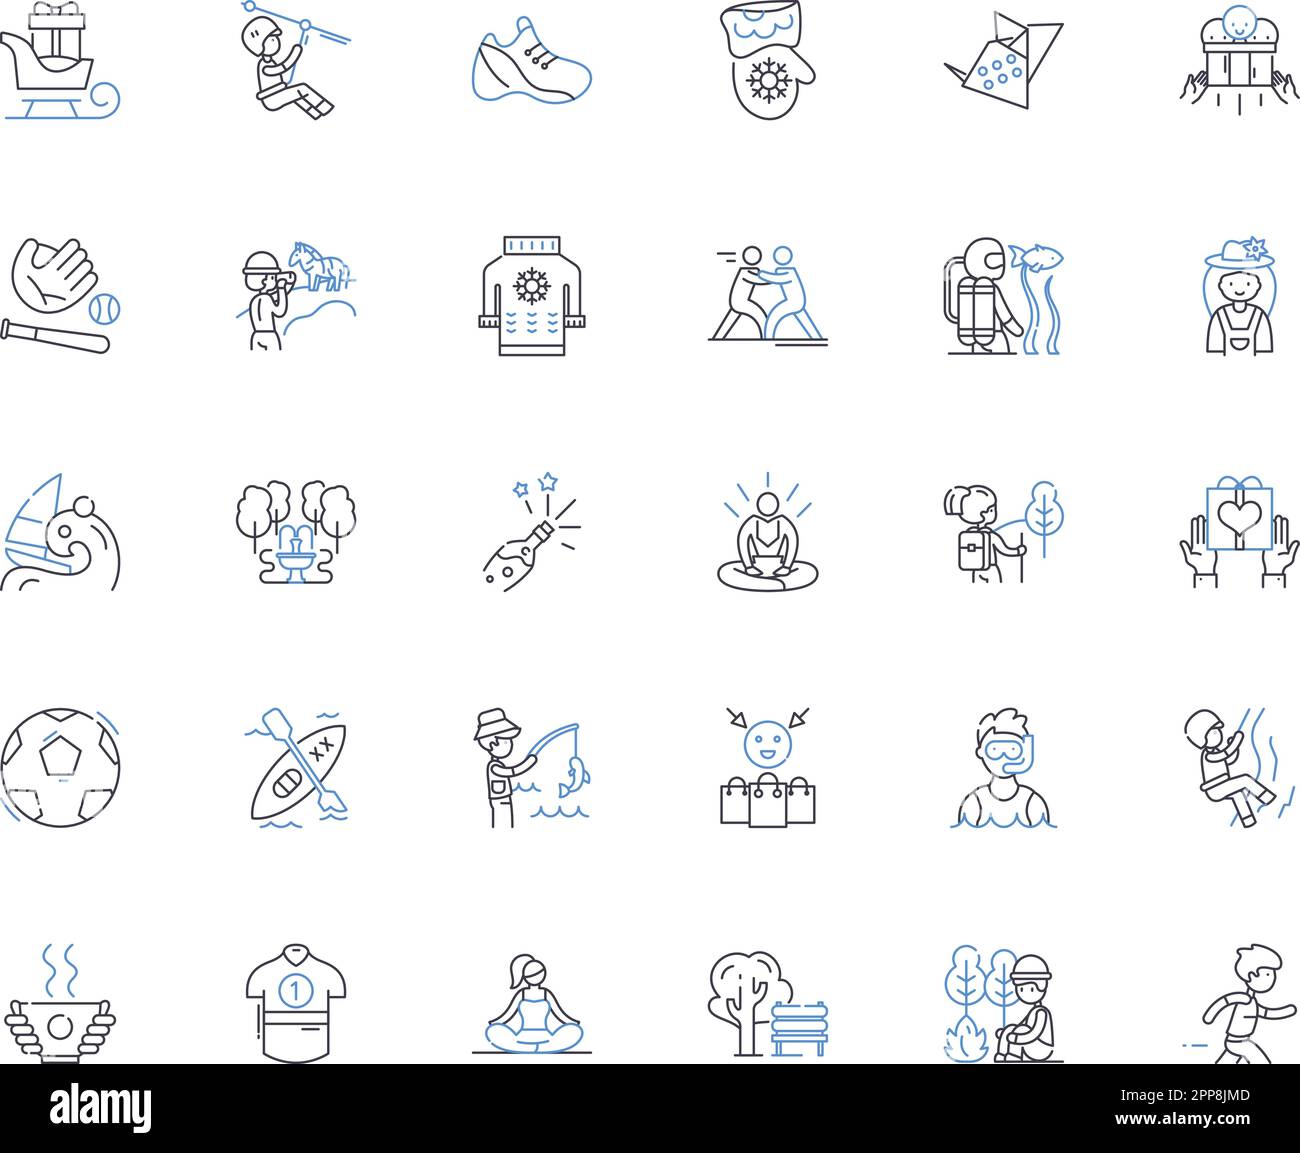 Occupied line icons collection. Confinement, Control, Resistance, Oppression, Struggle, Authority, Occupation vector and linear illustration Stock Vector